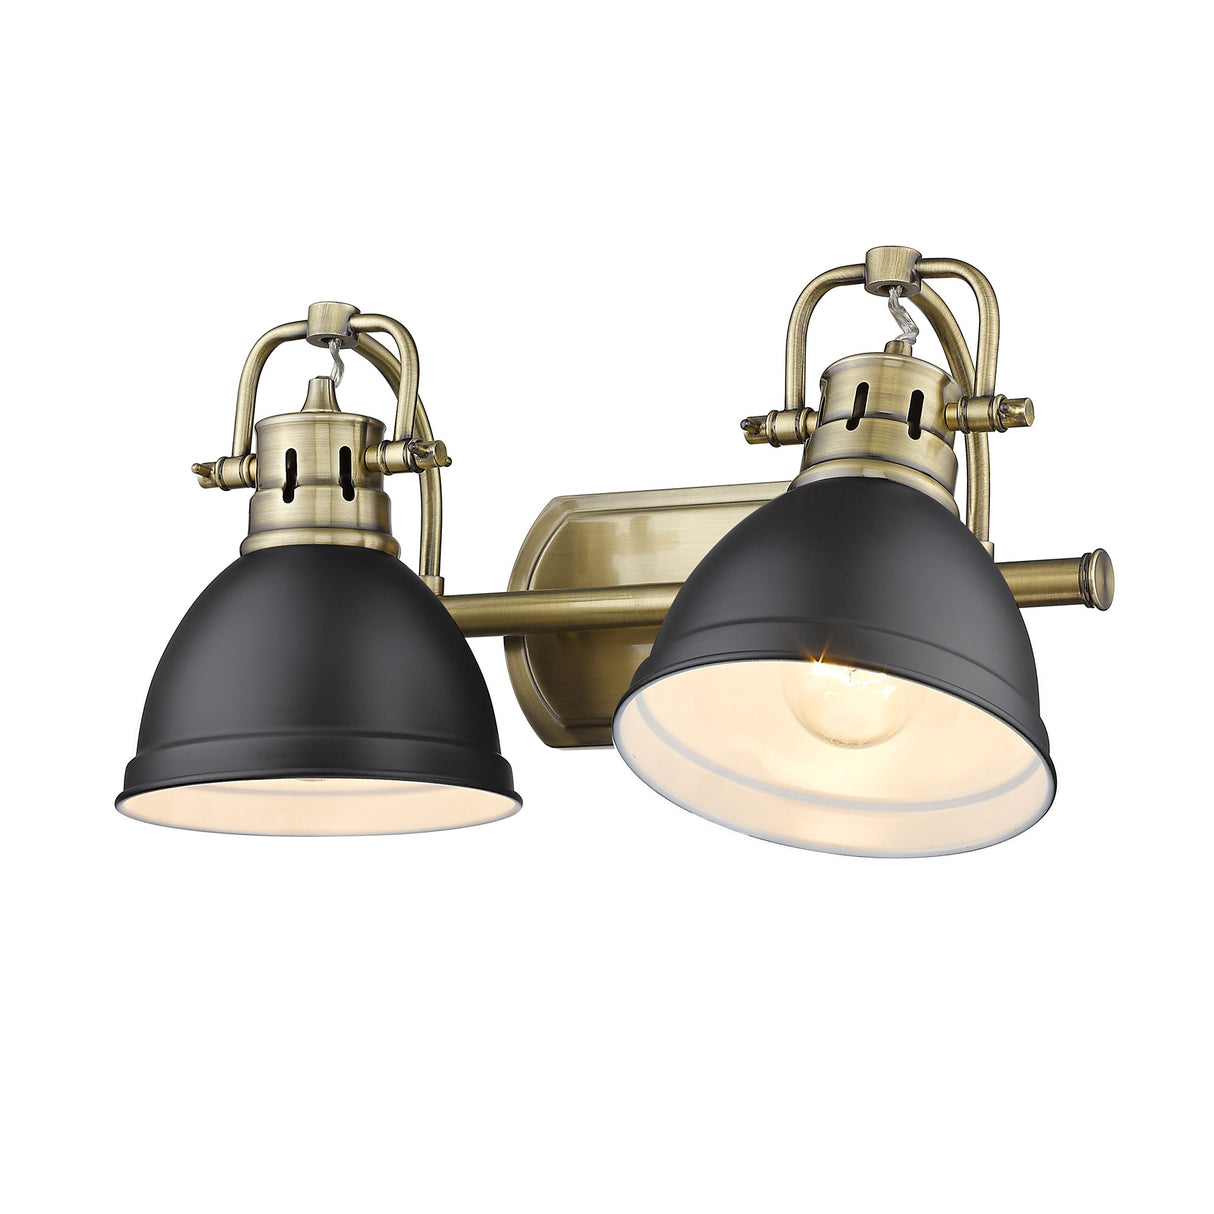 Duncan 2 Light Bath Vanity in Aged Brass with Matte Black Shades